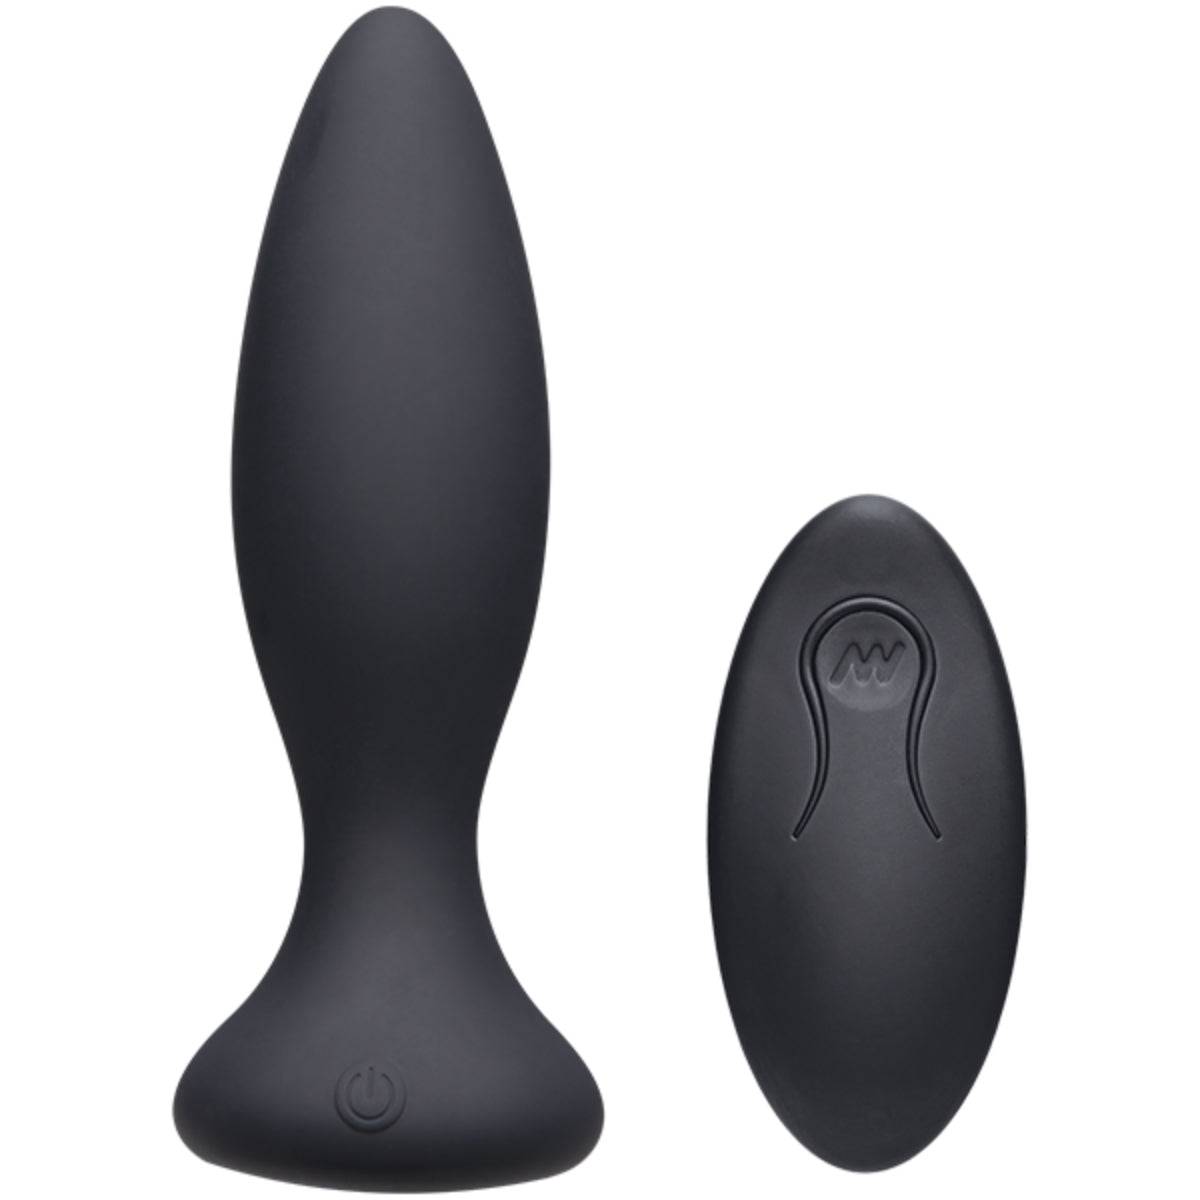 A-Play Vibe Beginner Remote Control Silicone Vibrating Butt Plug Black 4.75 Inch - Simply Pleasure